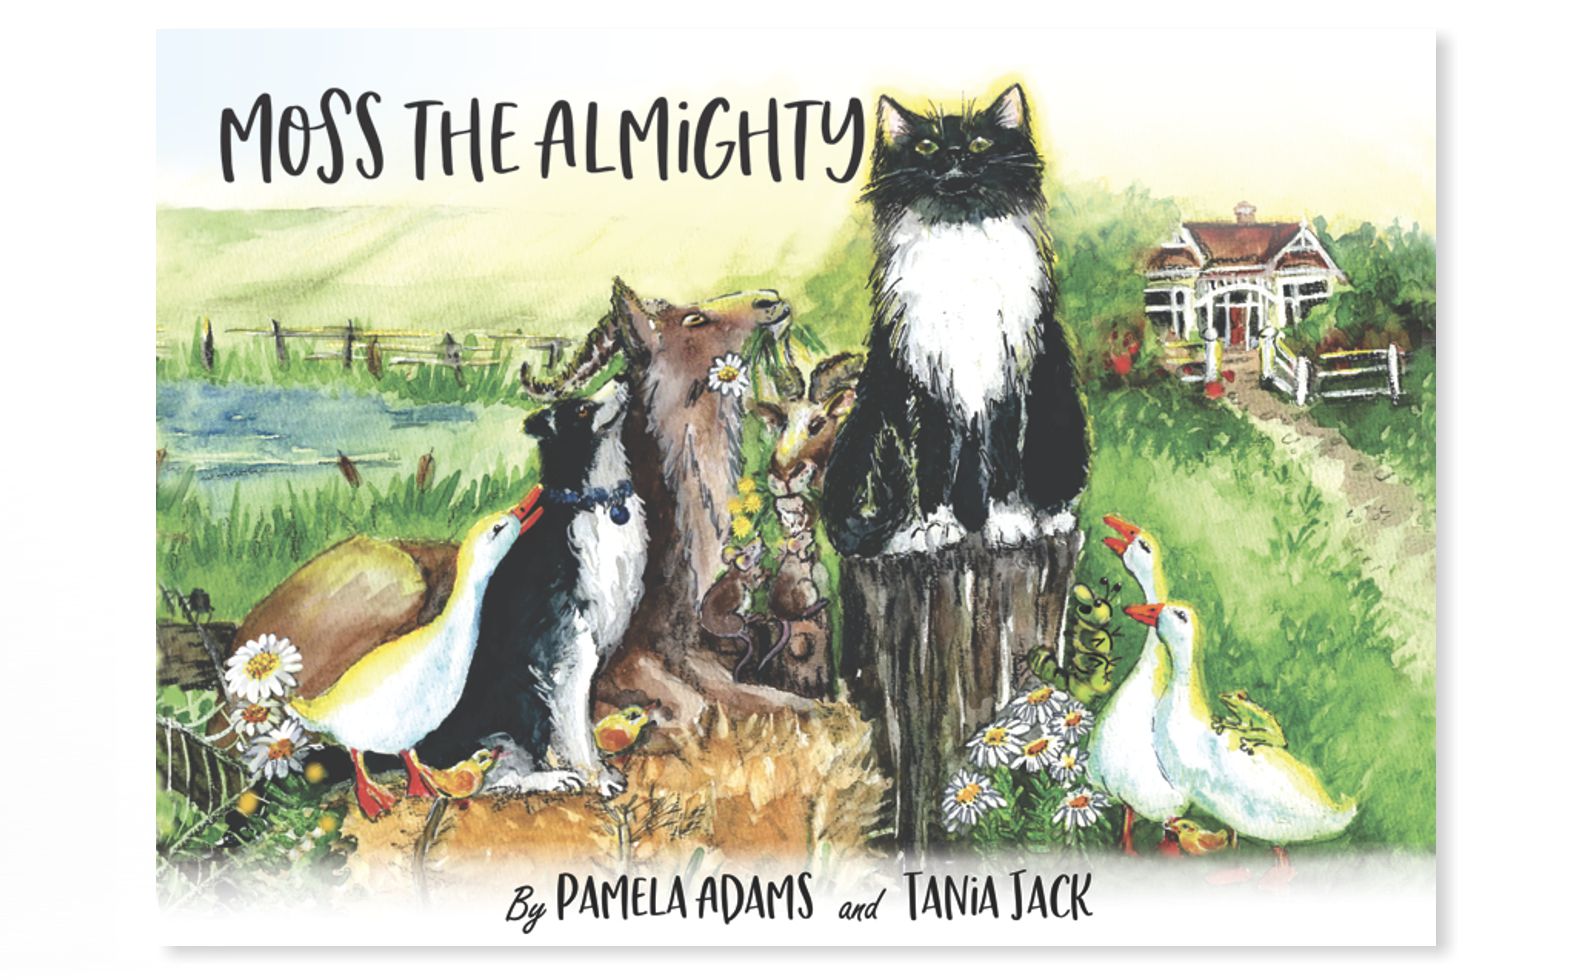 Moss the Almighty. A children's book written by Pamela Adams, Illustrated by Tania Jack and published by Holistic publishing